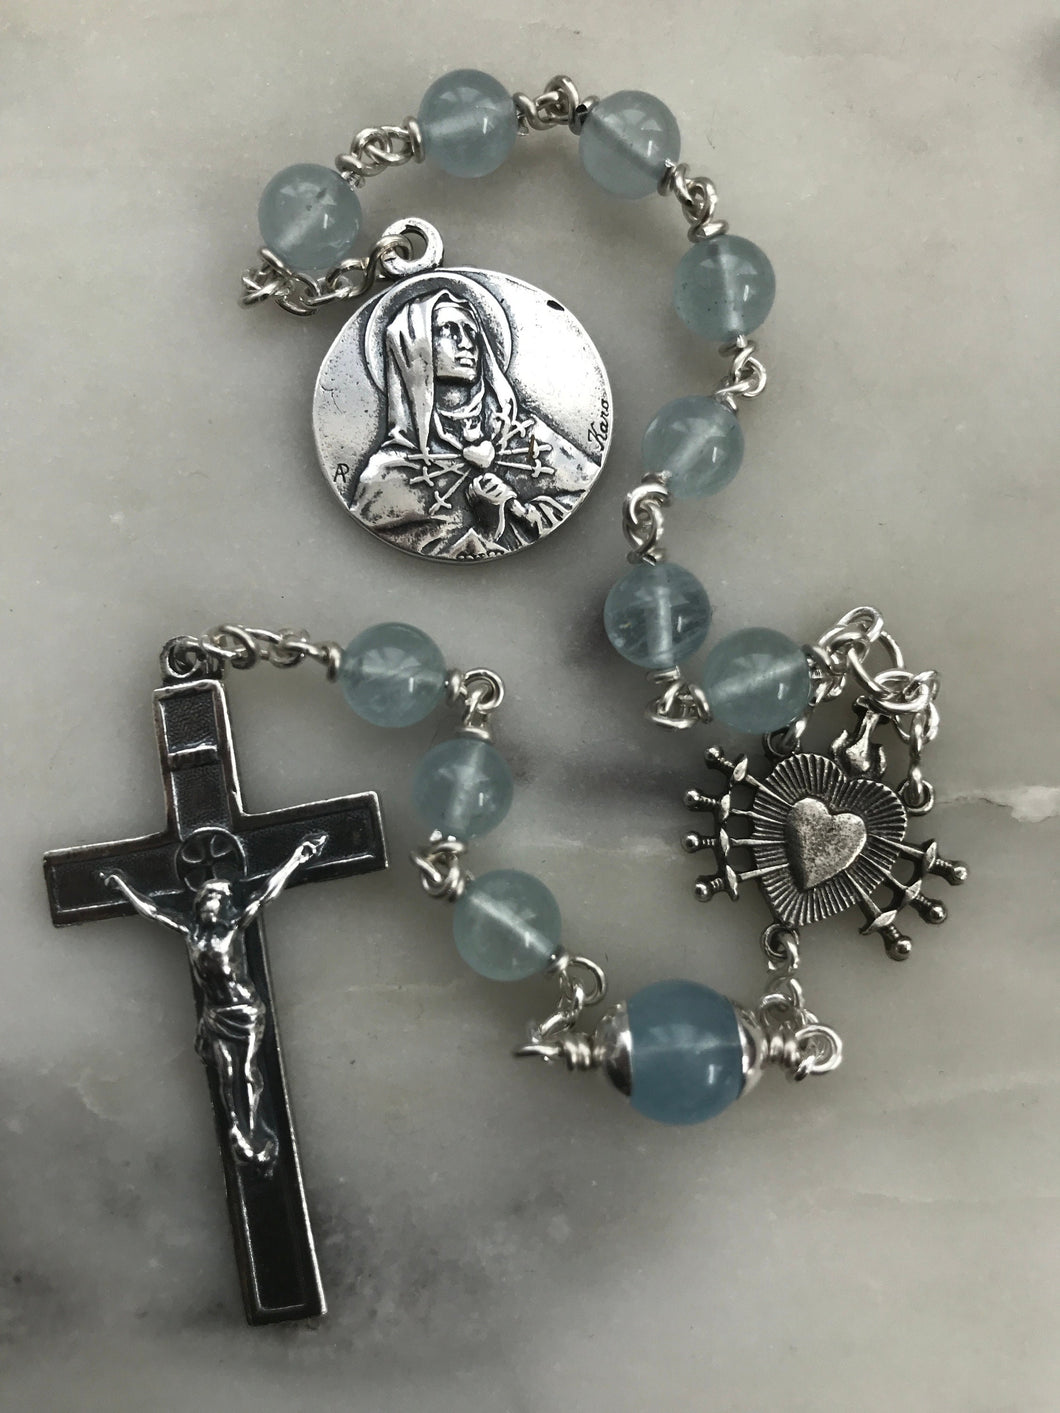 Pocket Servite Rosary - Aquamarine Gemstones - Argentium and Sterling Silver - Seven Sorrows Chaplet - Our Lady of Sorrows CeCeAgnes